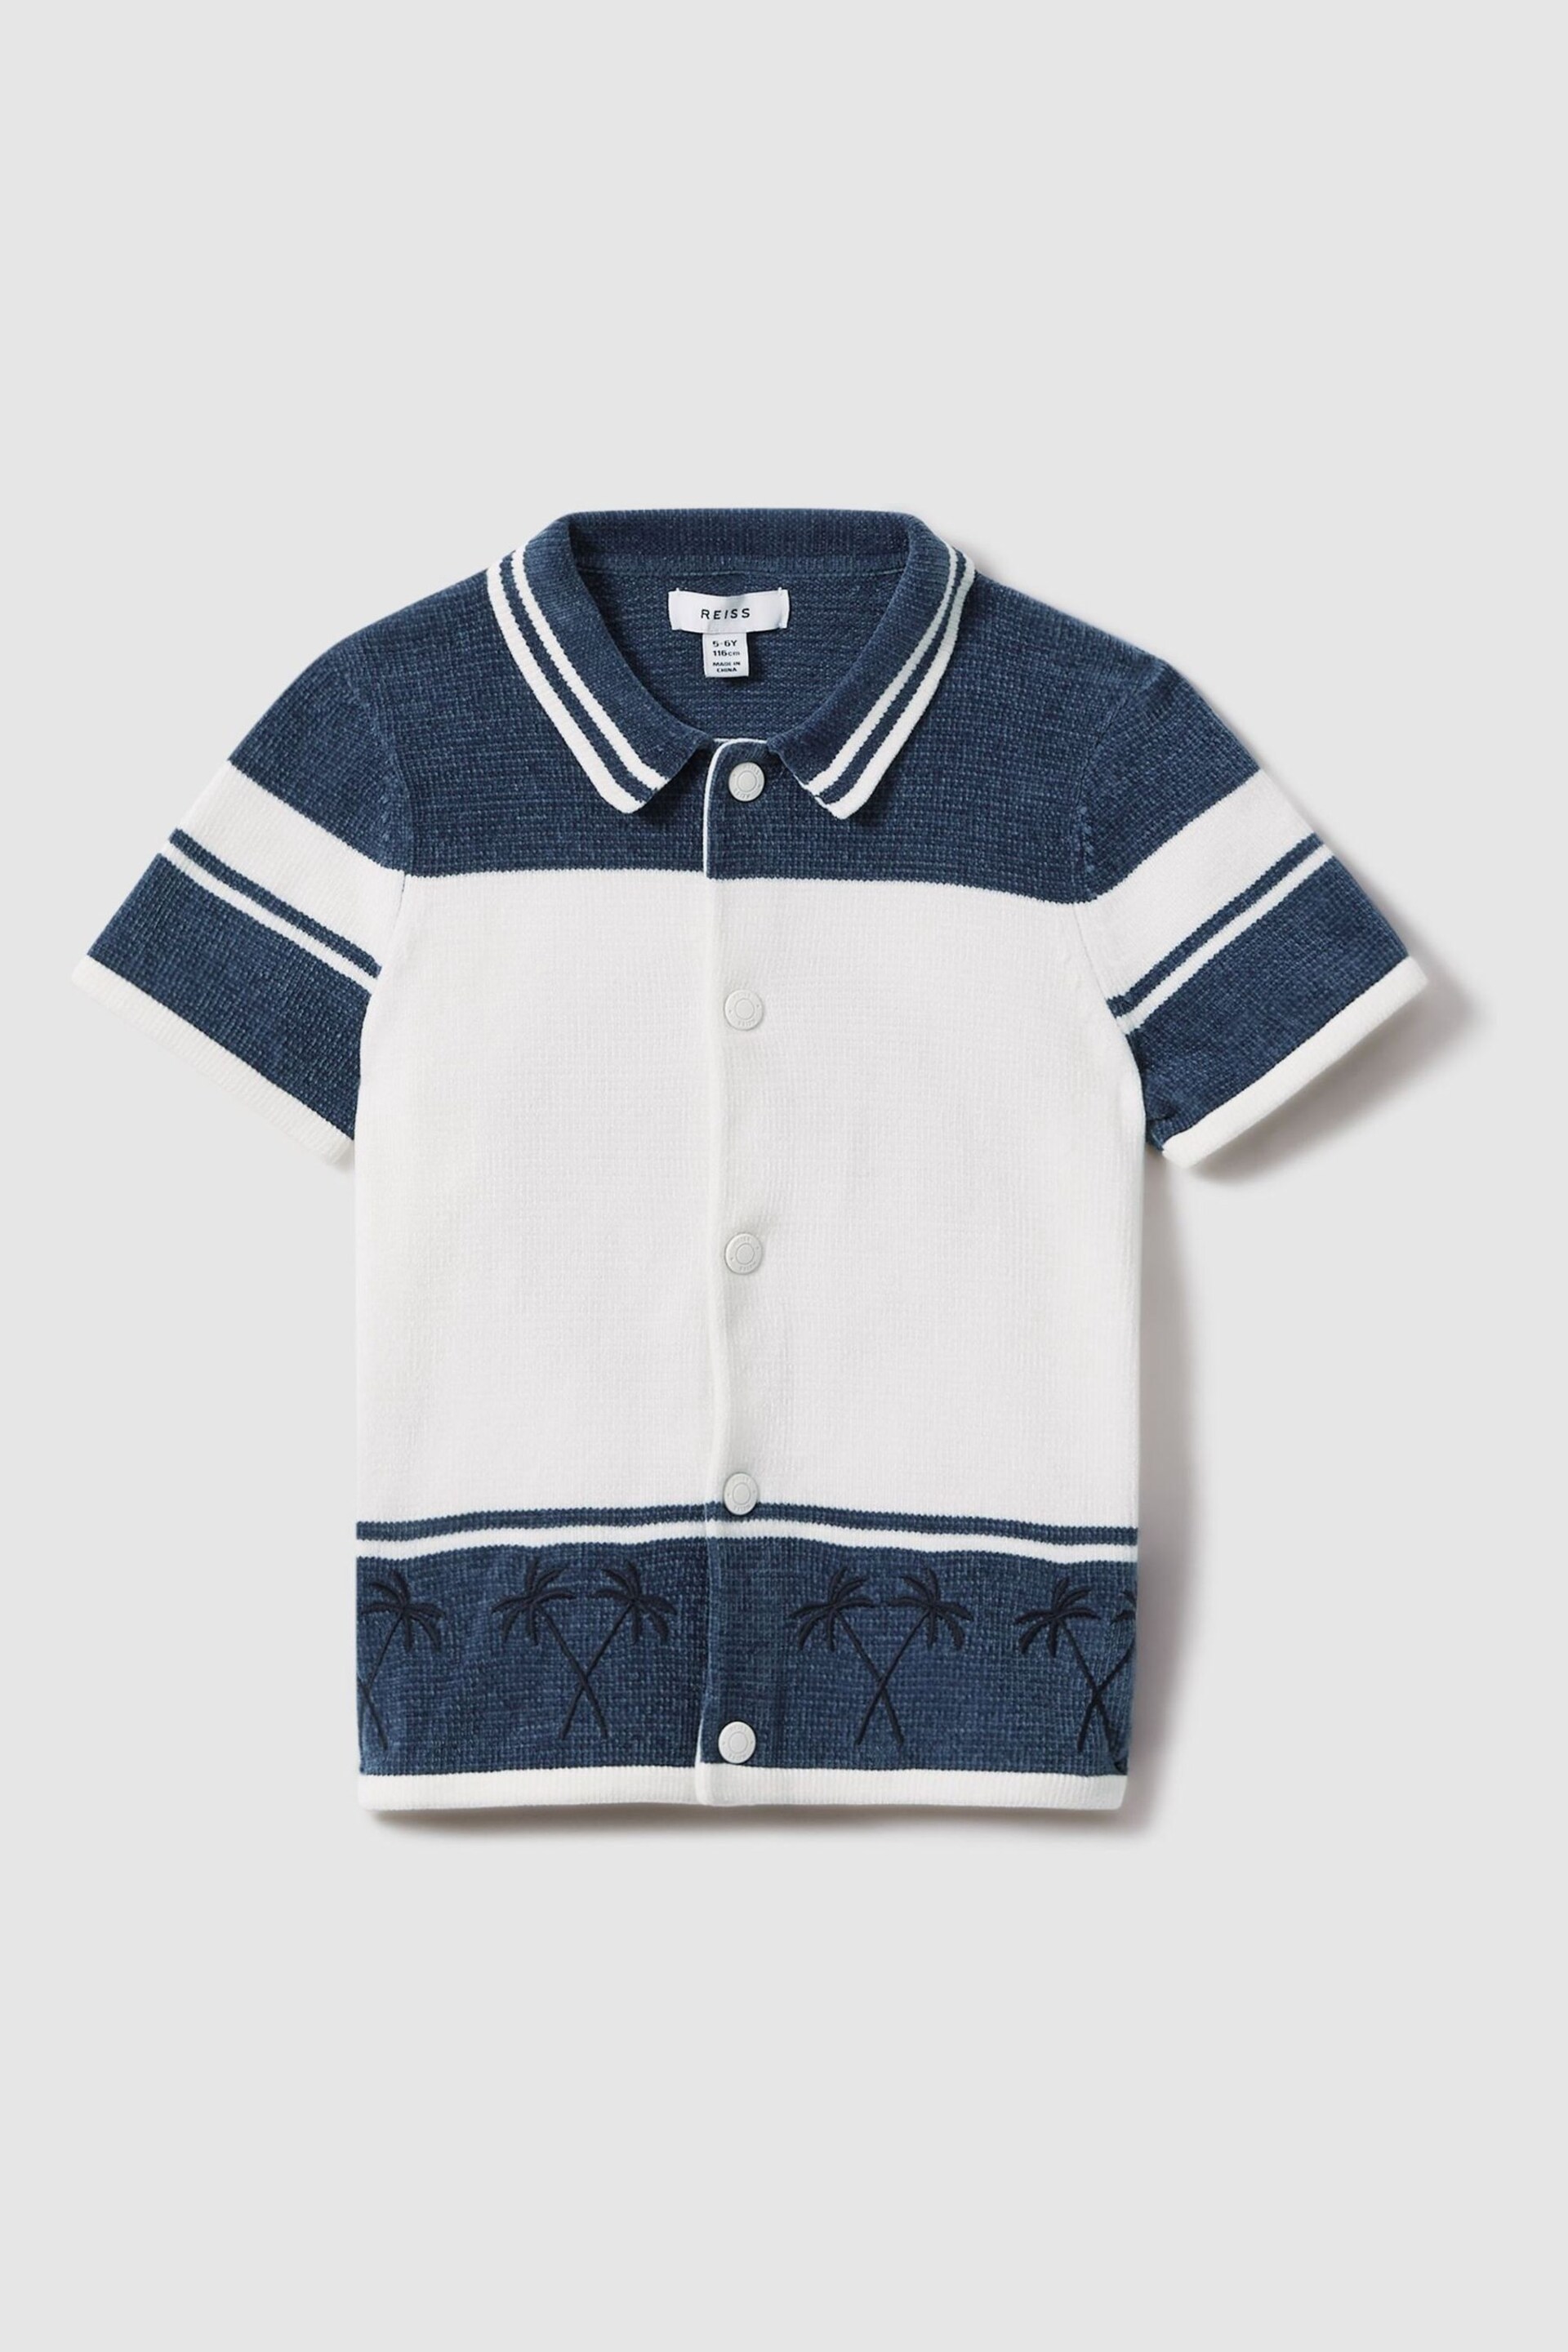 Reiss Optic White/Airforce Blue Bowler Senior Velour Embroidered Striped Shirt - Image 2 of 4